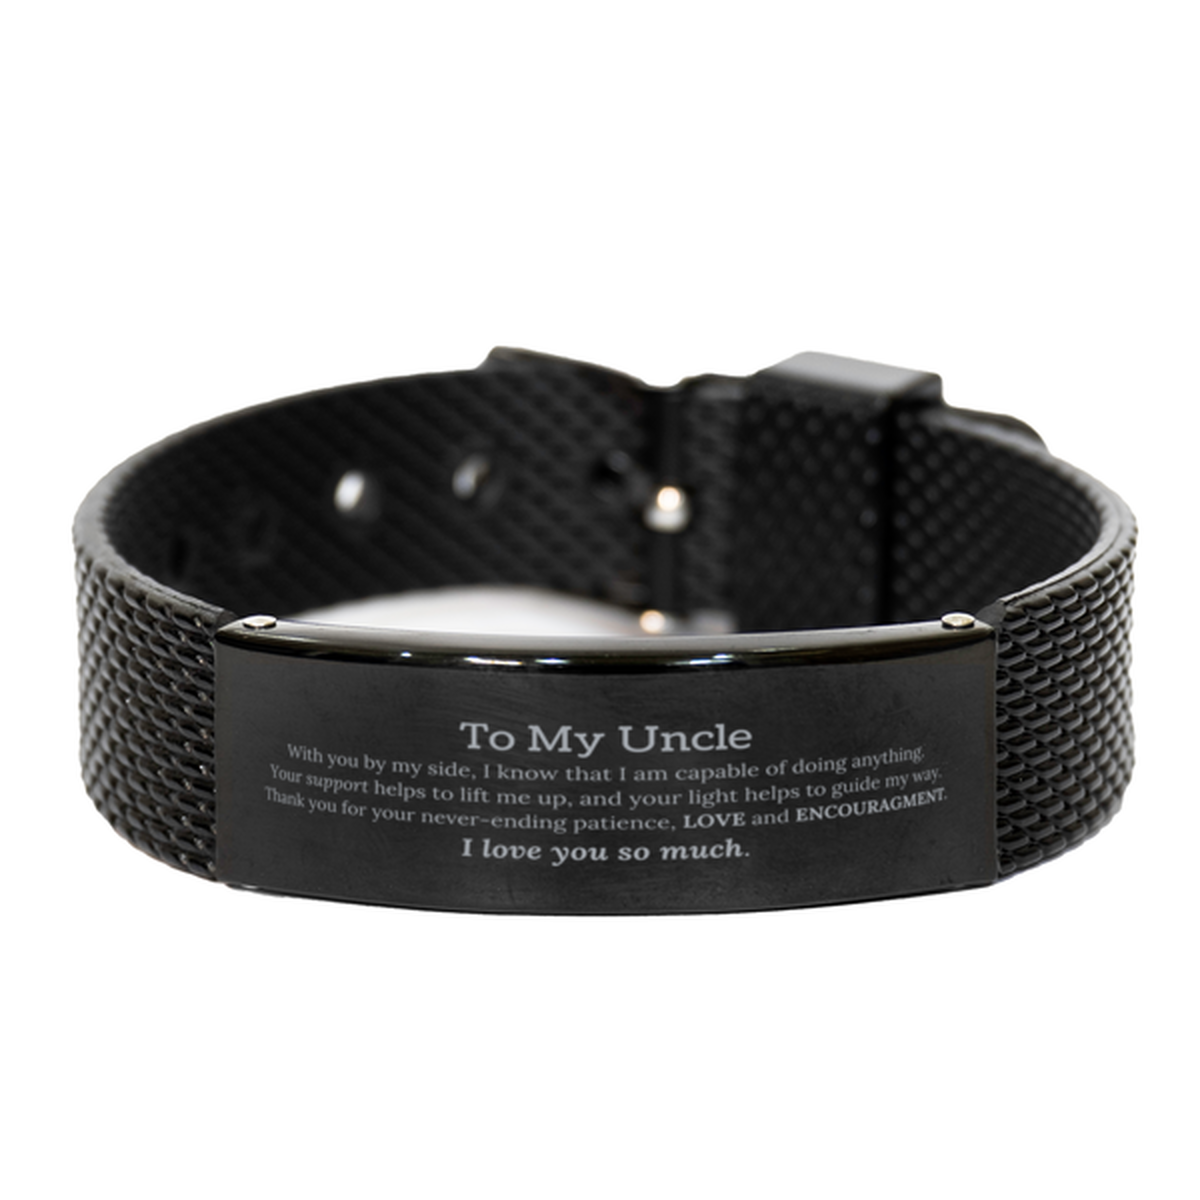 Appreciation Uncle Black Shark Mesh Bracelet Gifts, To My Uncle Birthday Christmas Wedding Keepsake Gifts for Uncle With you by my side, I know that I am capable of doing anything. I love you so much